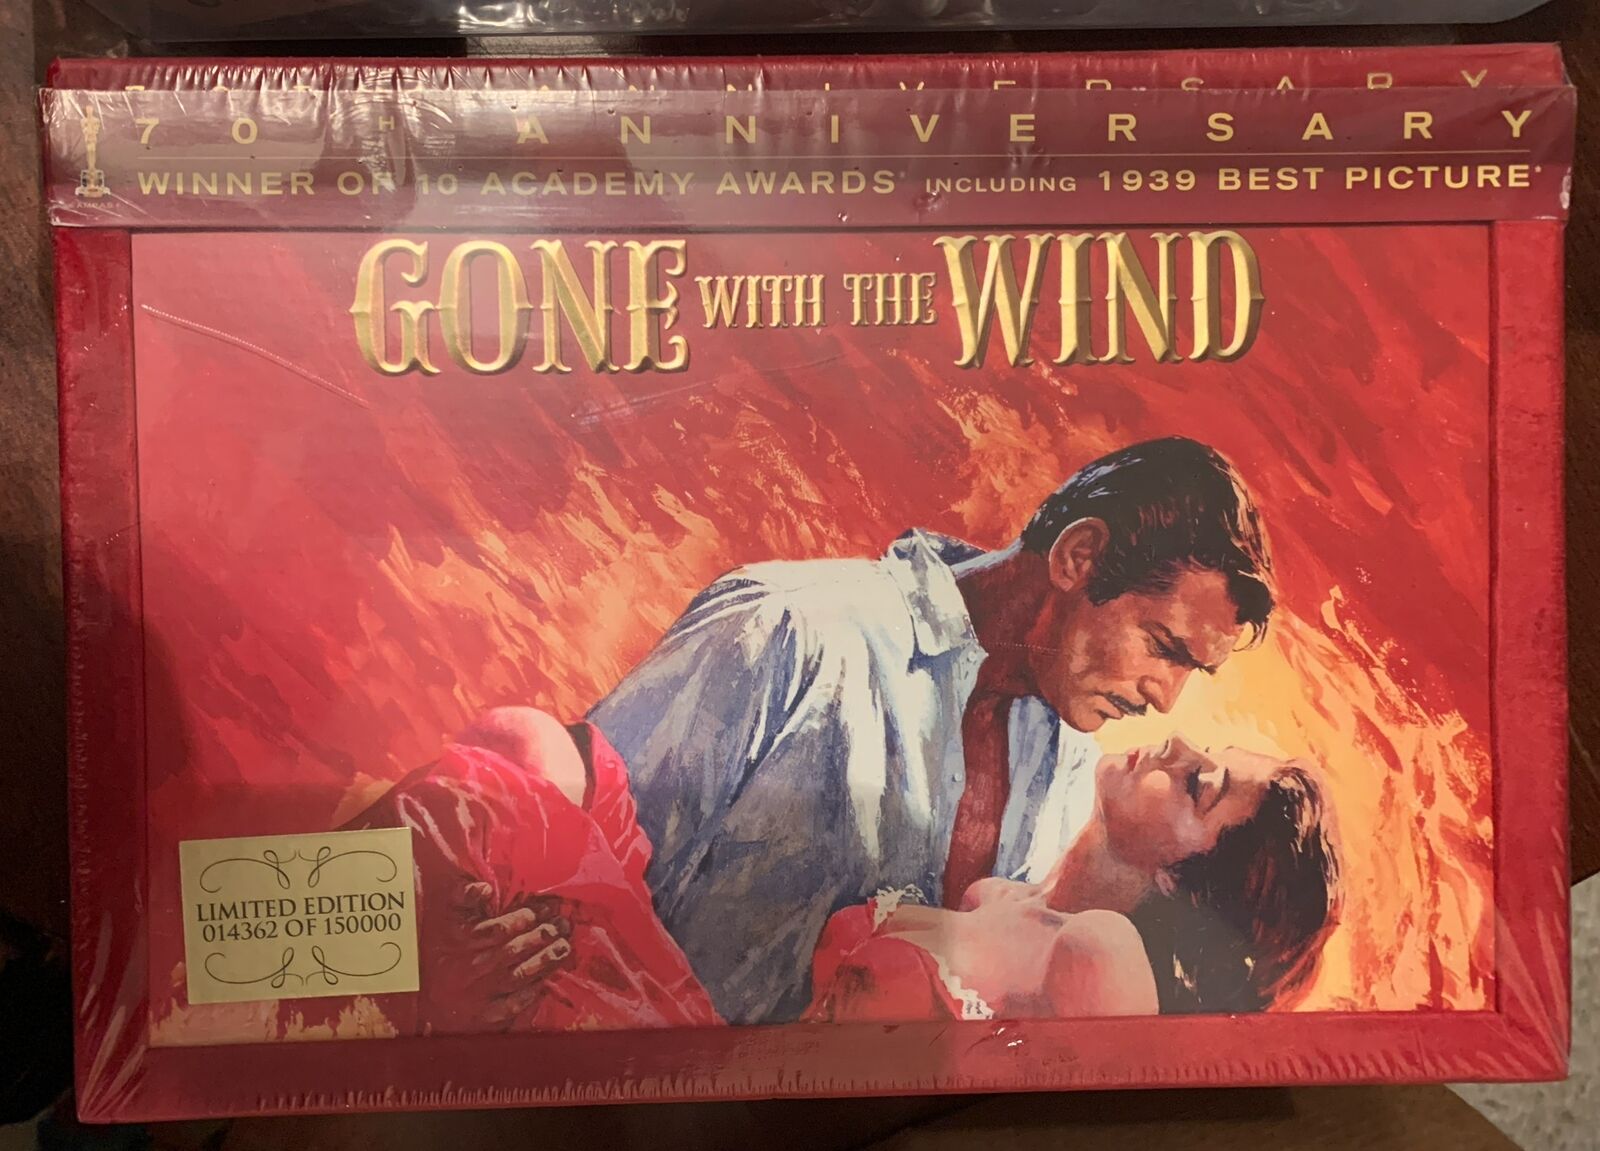 NSIB 70th Anniversary GONE WITH THE WIND Collector’s Ltd Ed Giftset *FUNDRAISER*